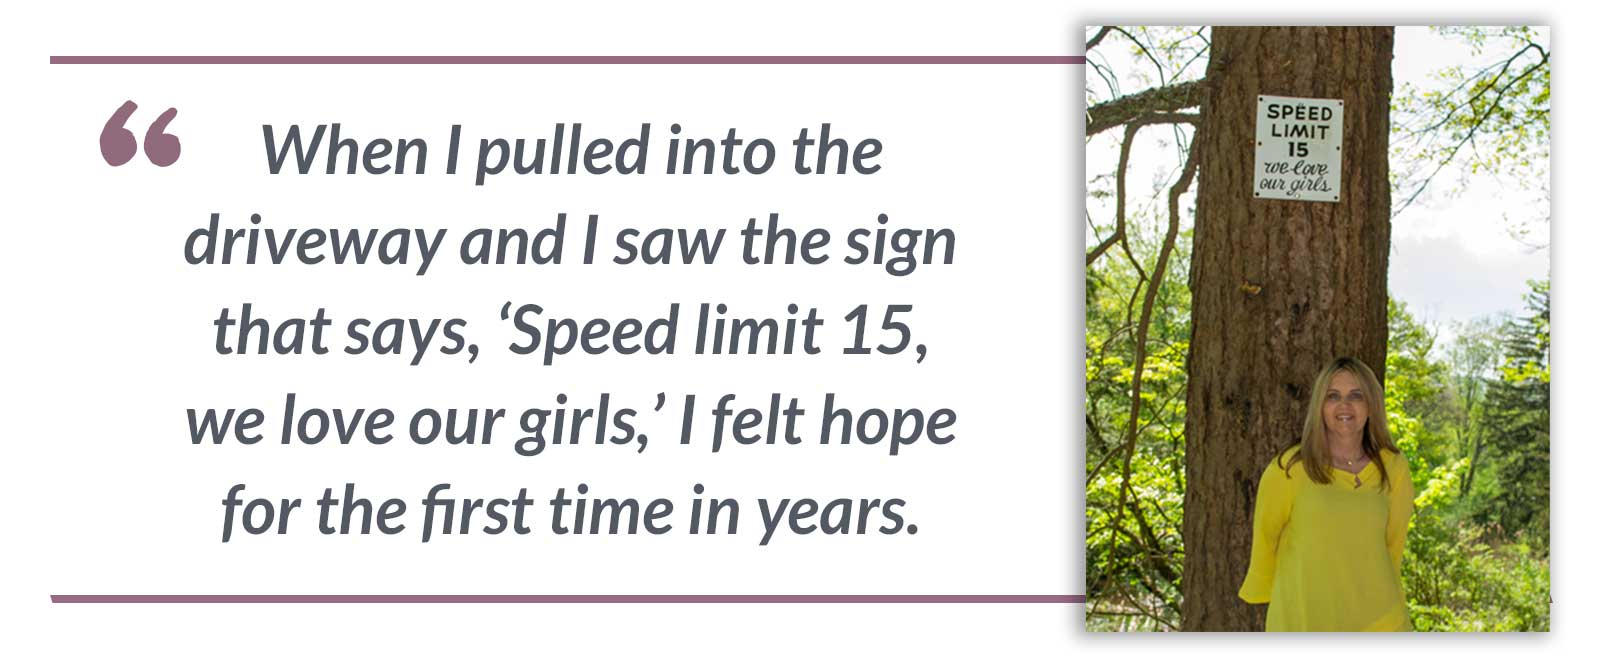 When I pulled into the driveway and I saw the sign that says, ‘Speed limit 15, we love our girls,’ I felt hope for the first time in years.-Beth